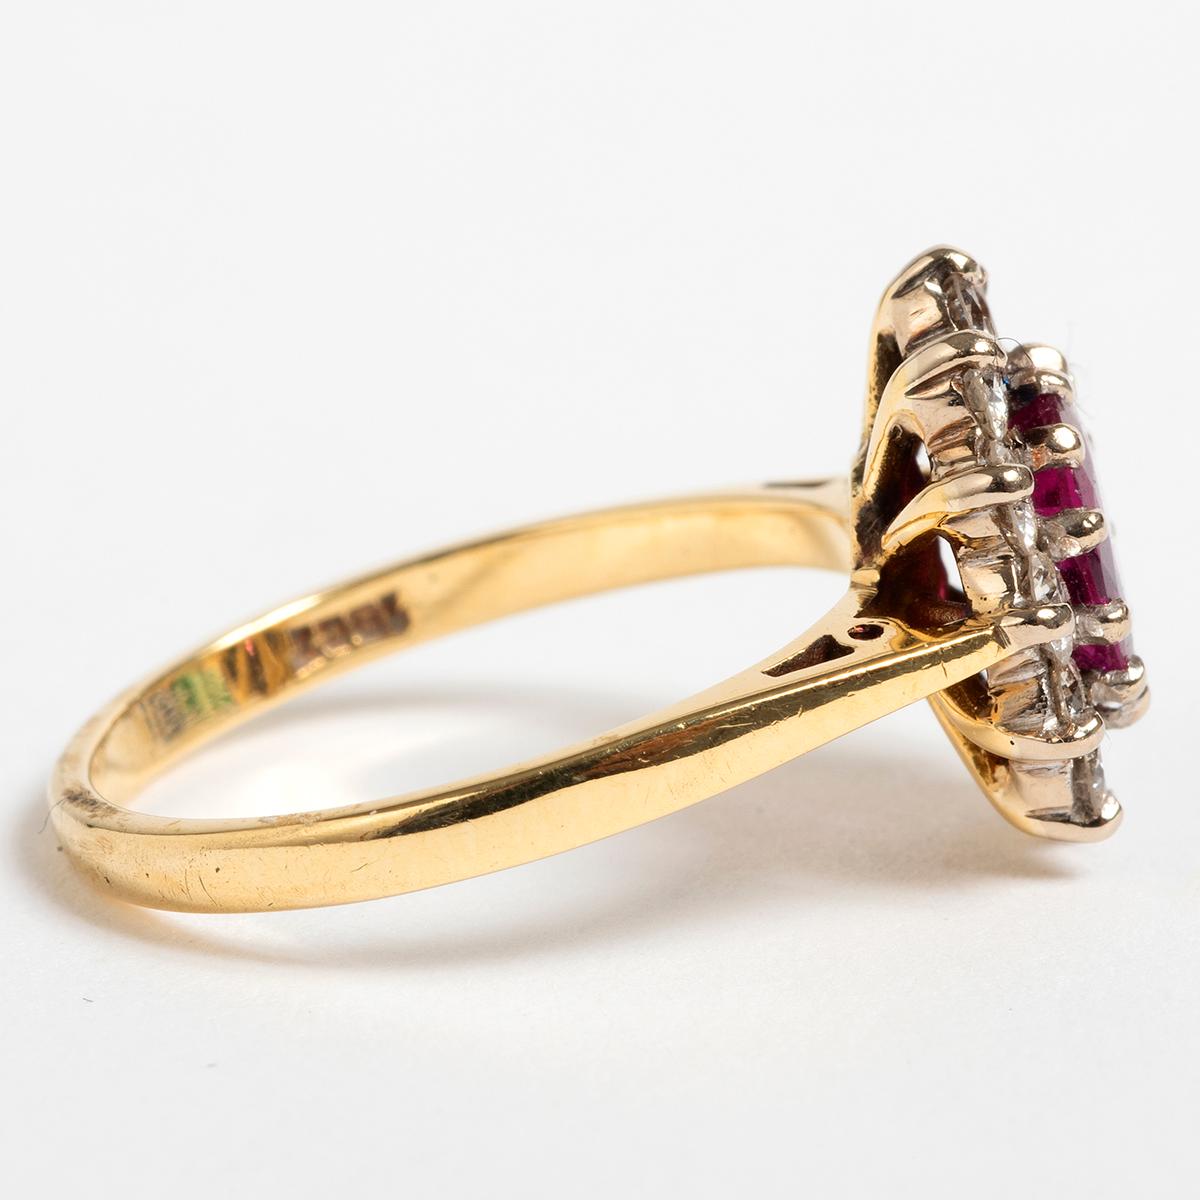 This elegant oval ruby and diamond cluster ring is approx 0.50ct in weight. The ring is UK size L / US size 5.75. A very attractive ring